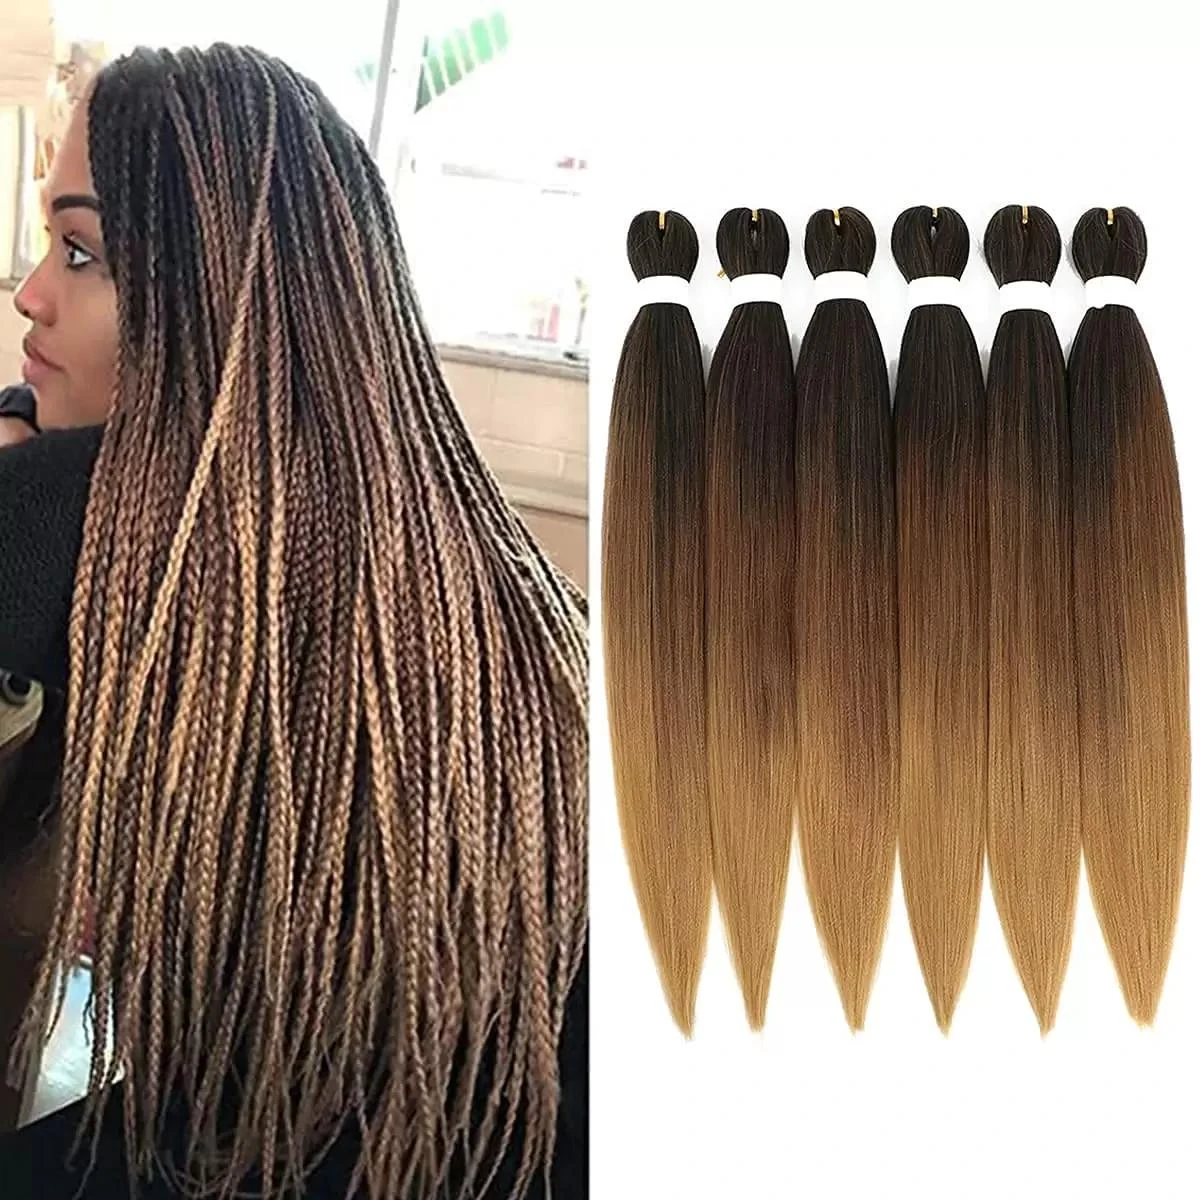 26 Inch Pre stretched Braiding Hair Extensions, Professional Easy Braids  Synthetic Fibers Itch Free Yaki Texture Pre stretched| | - AliExpress